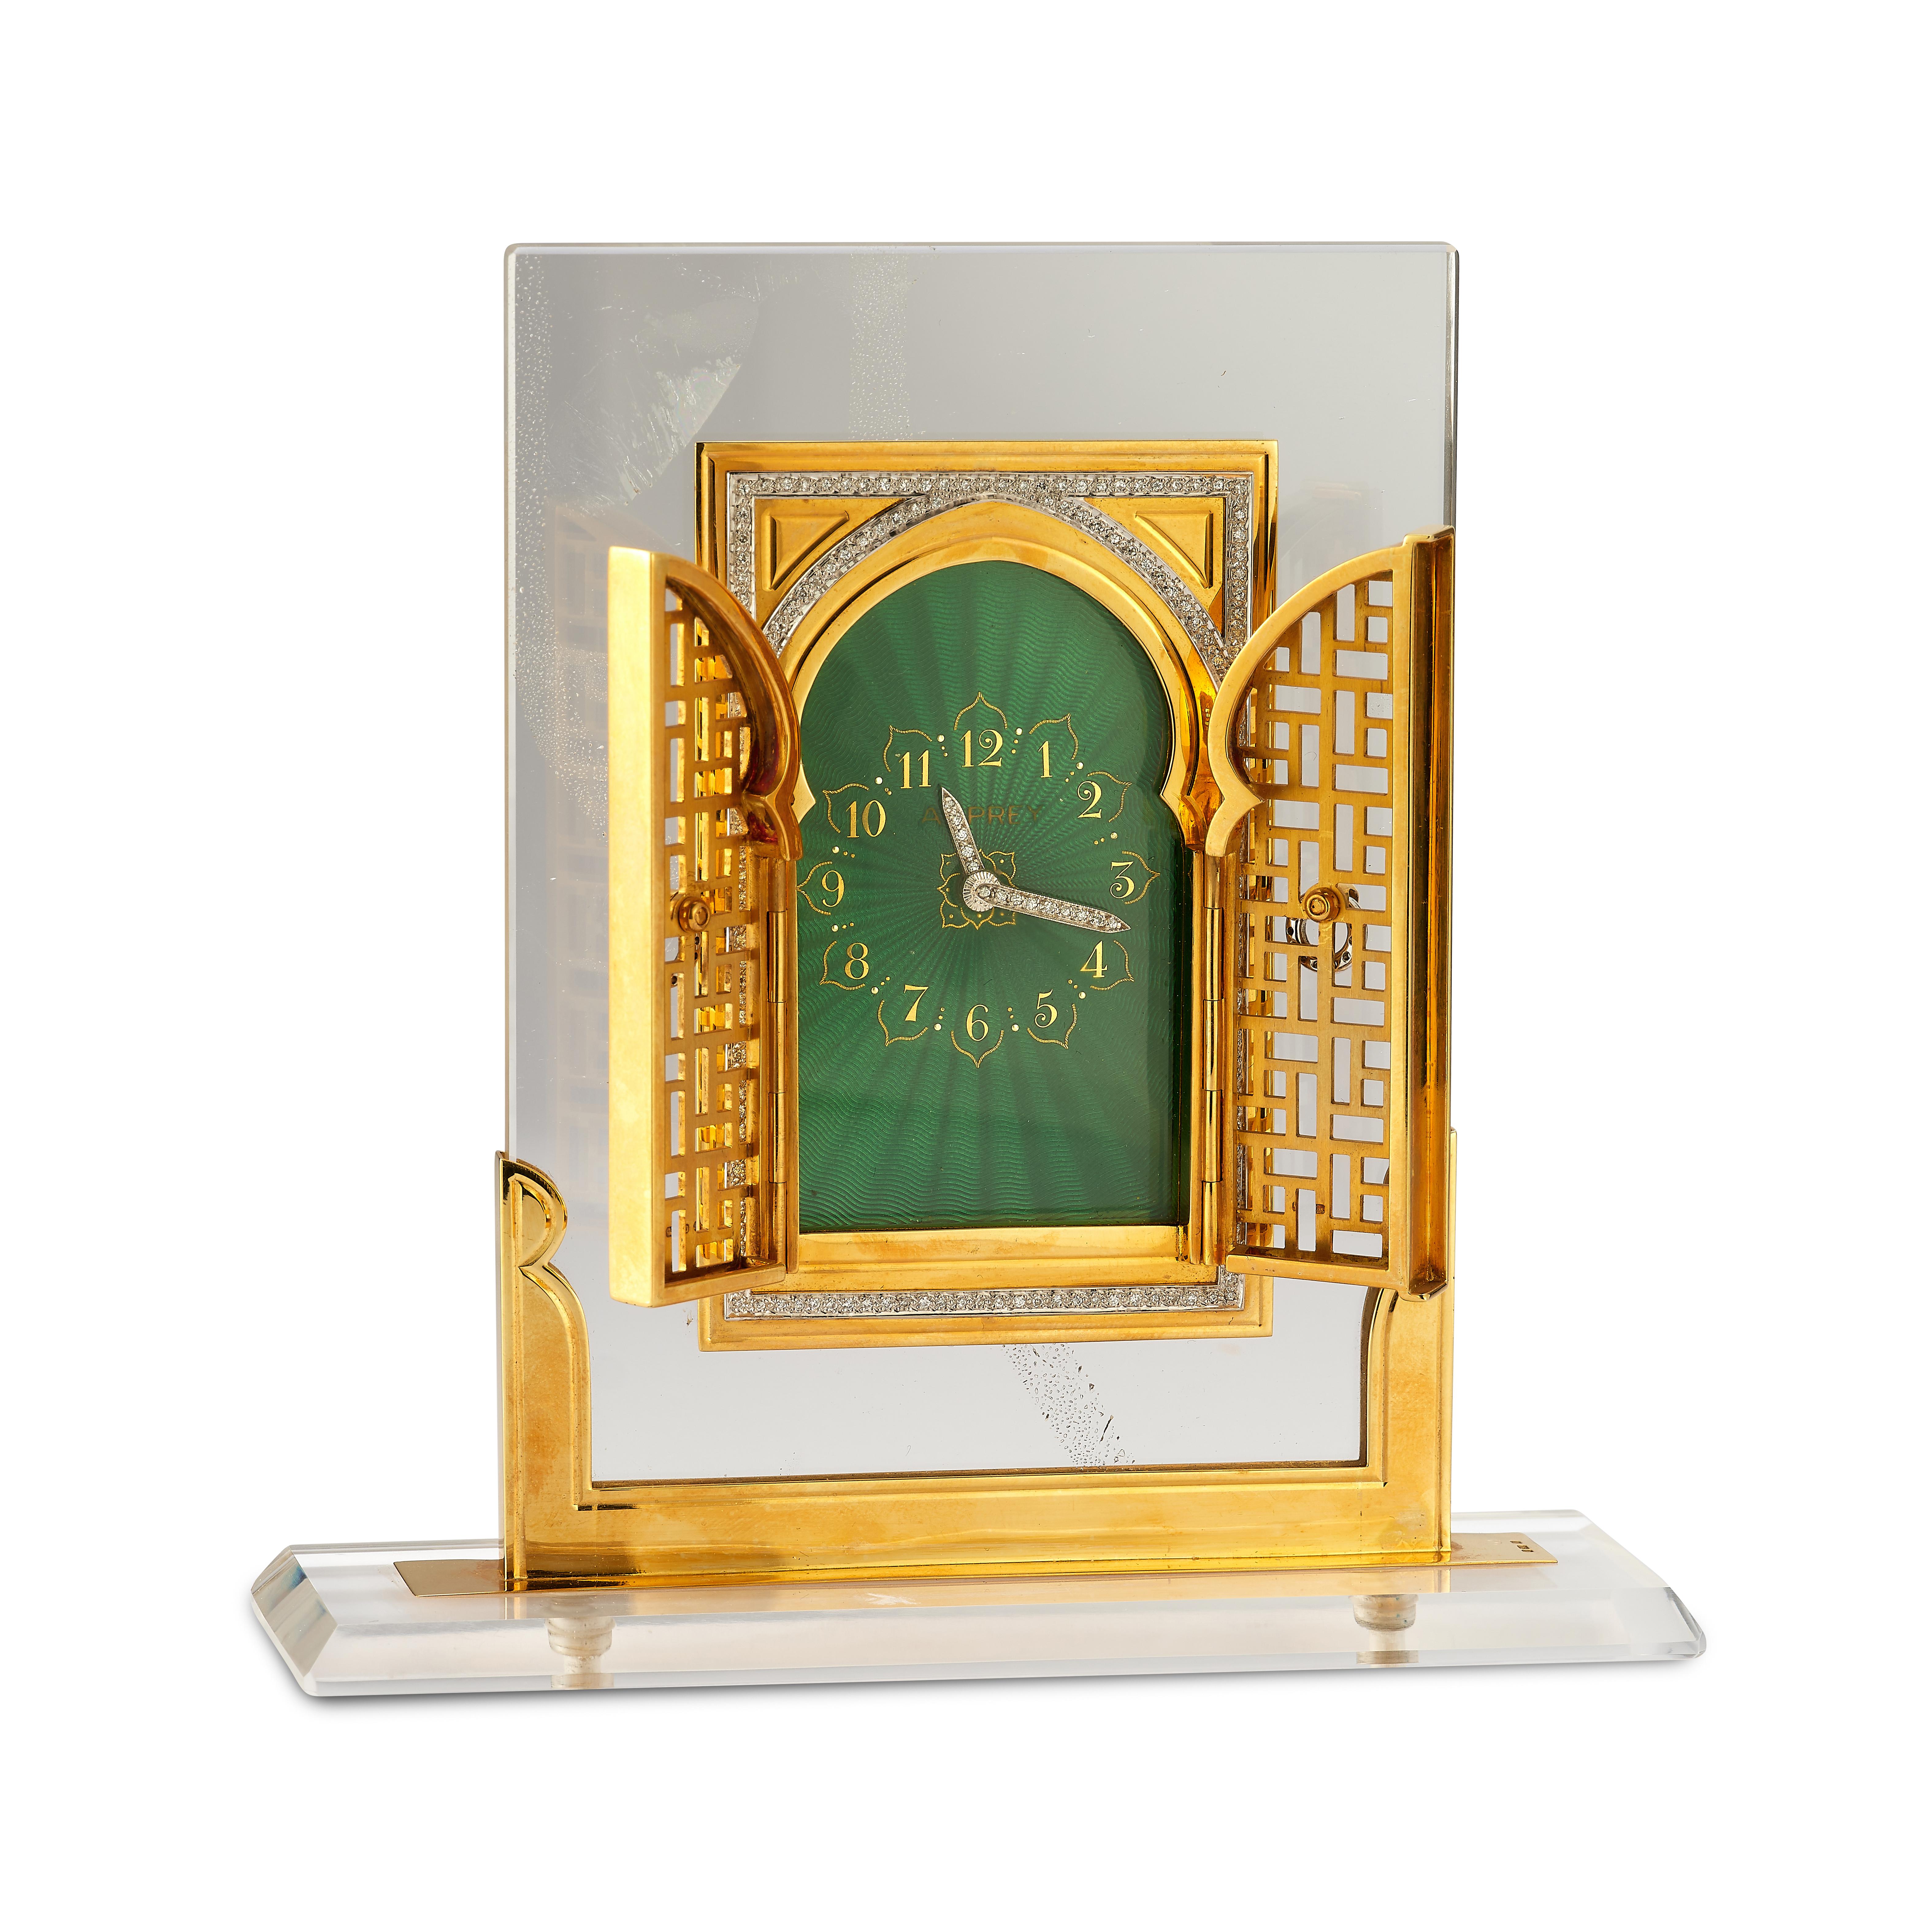 Asprey Rock Crystal Diamond & Enamel Desk Clock

A beautifully crafted desk clock with a rock crystal base, an 18-karat gold casing and framing embellished with diamonds, and a green guilloche enamel face

Signed Asprey London

Mechanical movement